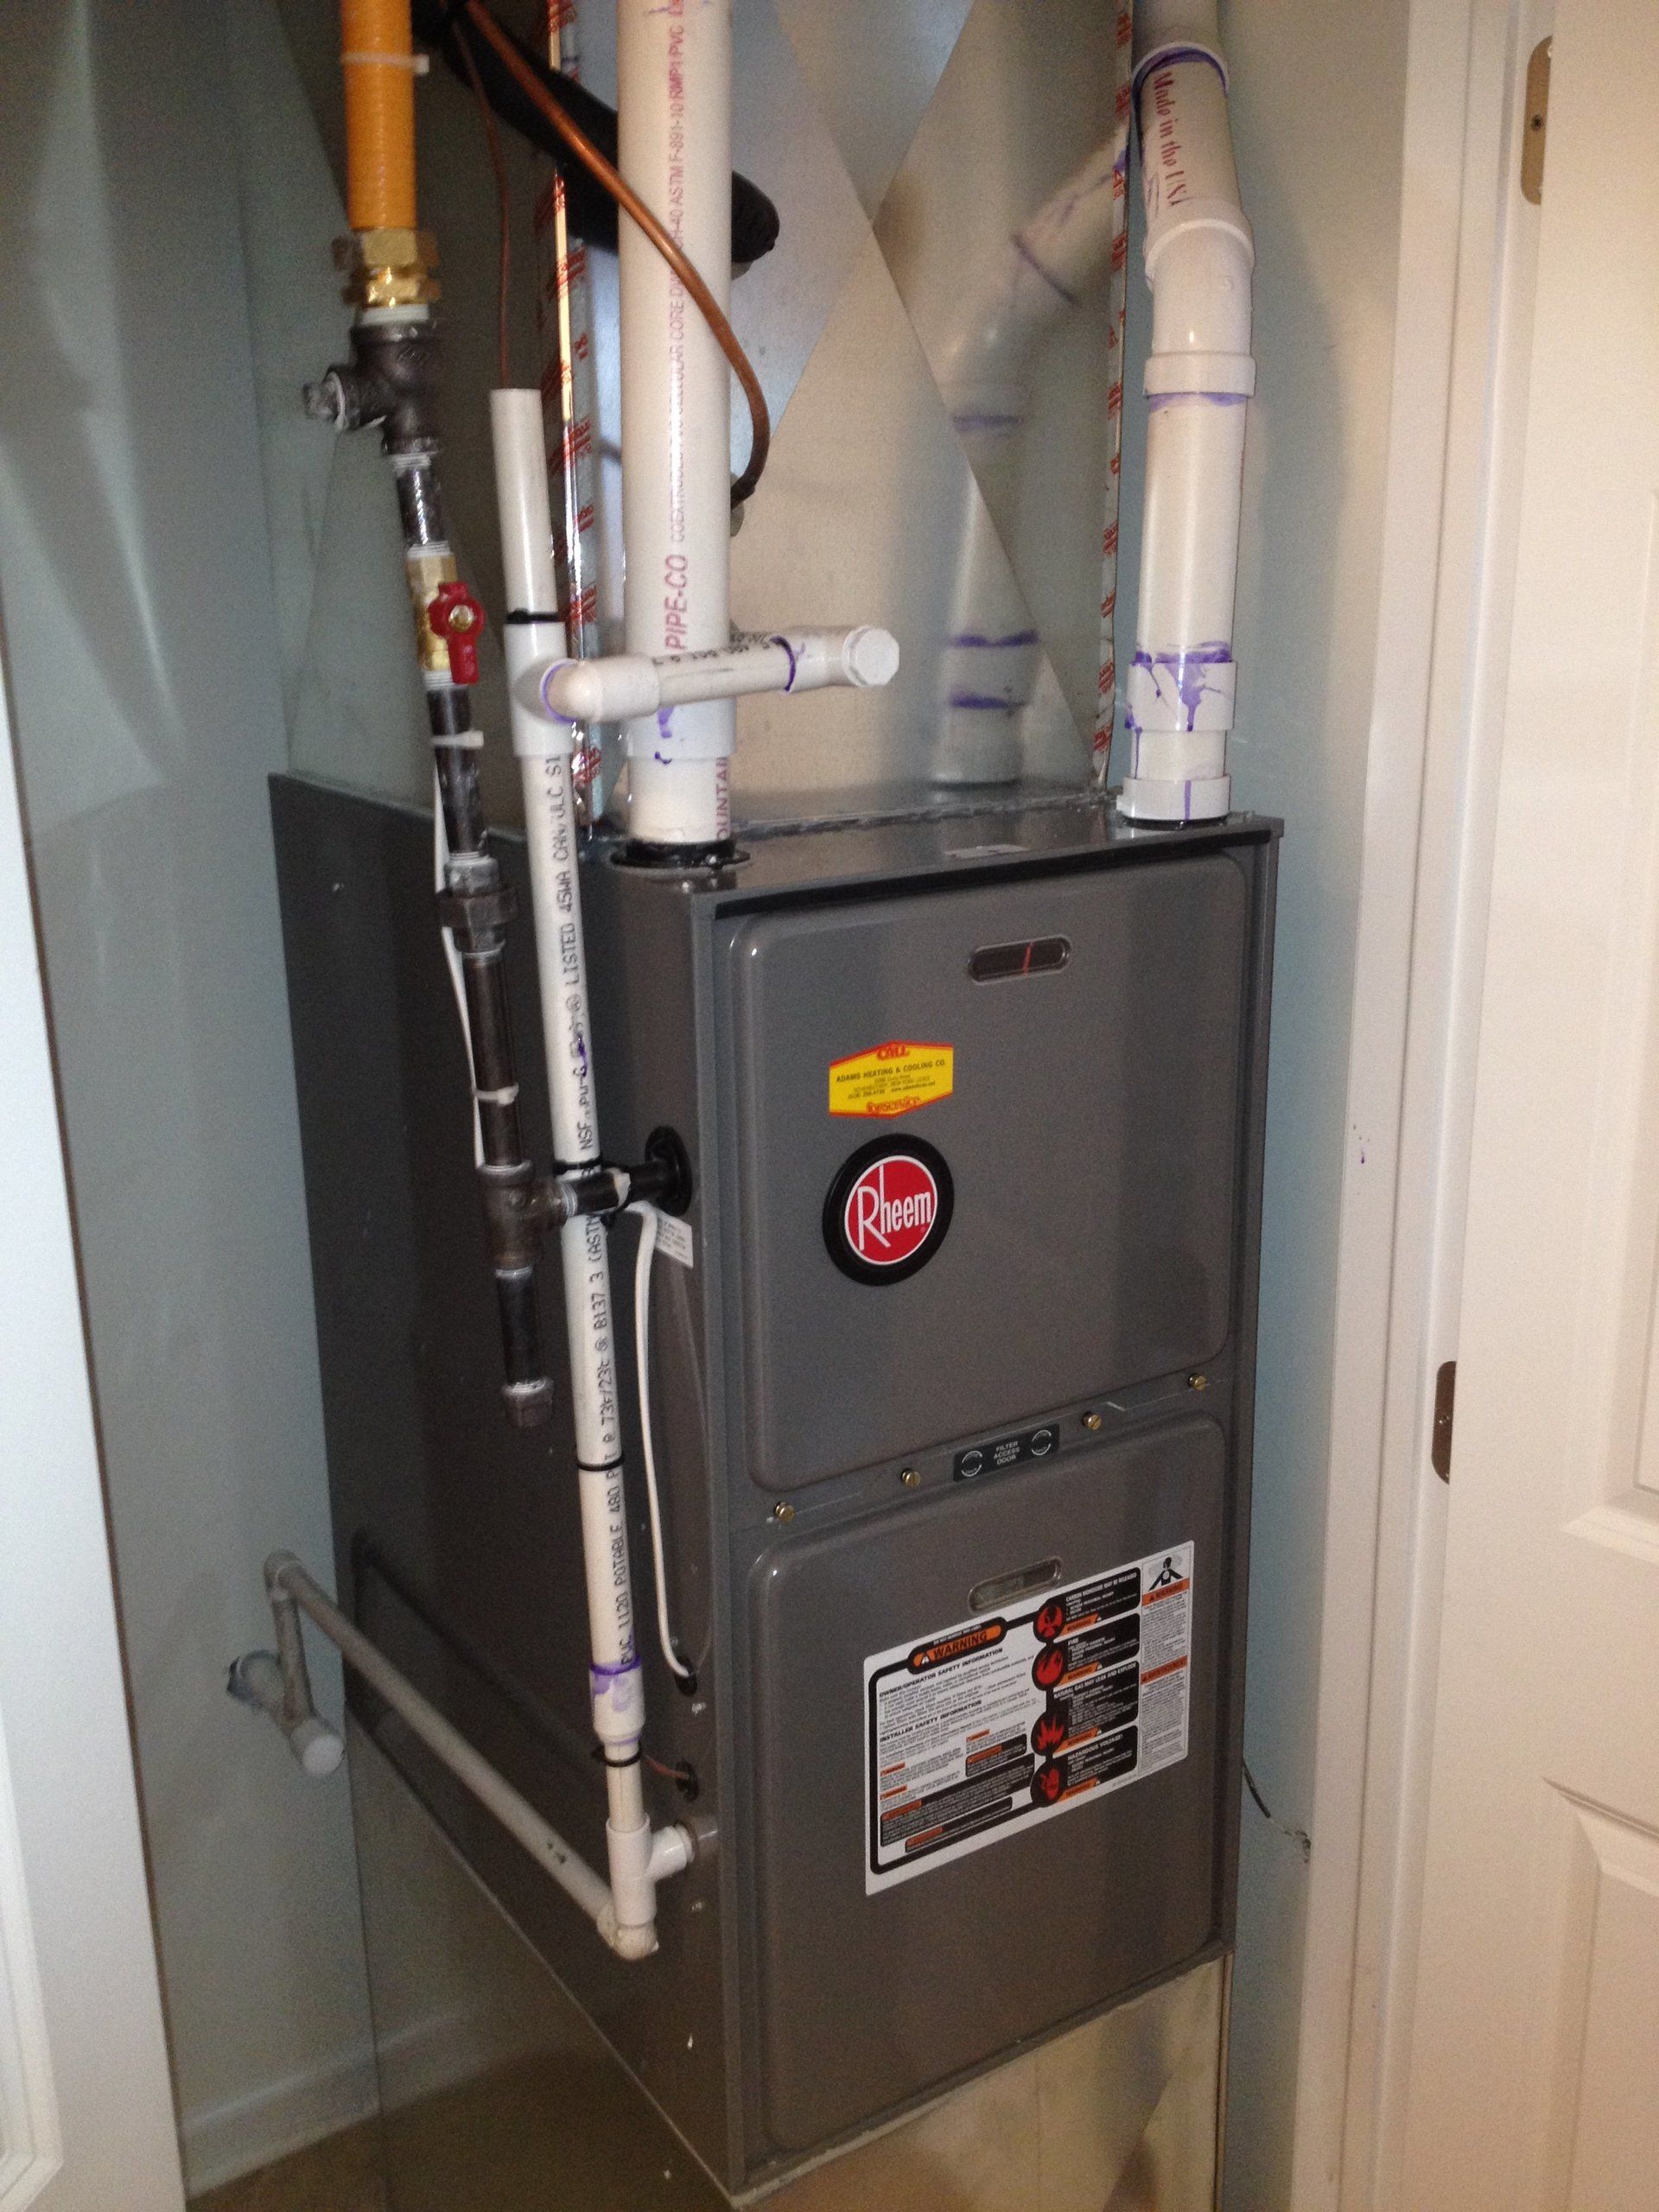 An installed rheem furnace installed by Adams Heating & Cooling in Saratoga Springs, NY